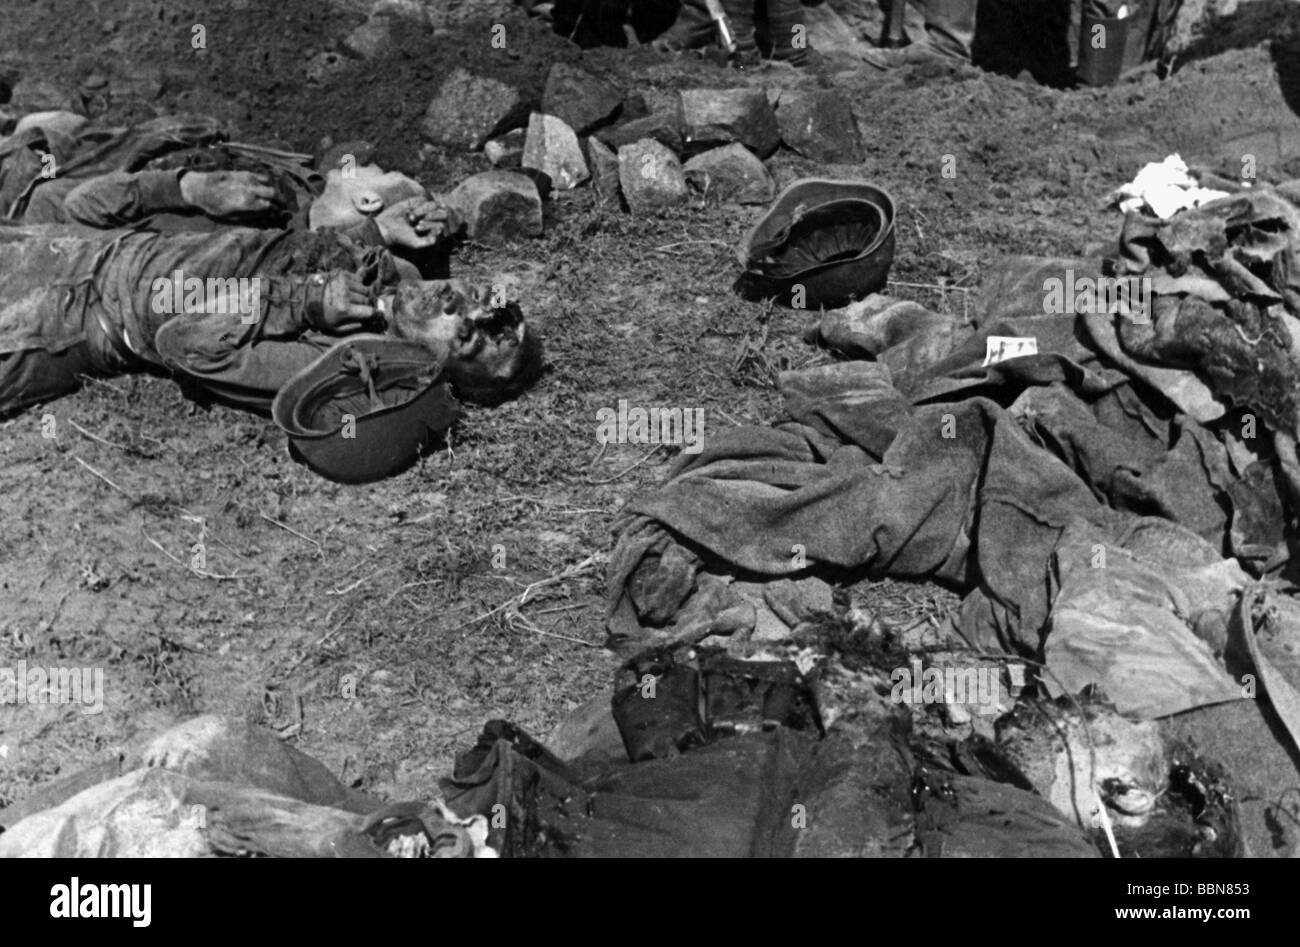 events, Second World War / WWII, Russia 1941, Soviet column after German air raid between Bialystok and Vaukavysk, killed soldiers, July 1941, Stock Photo